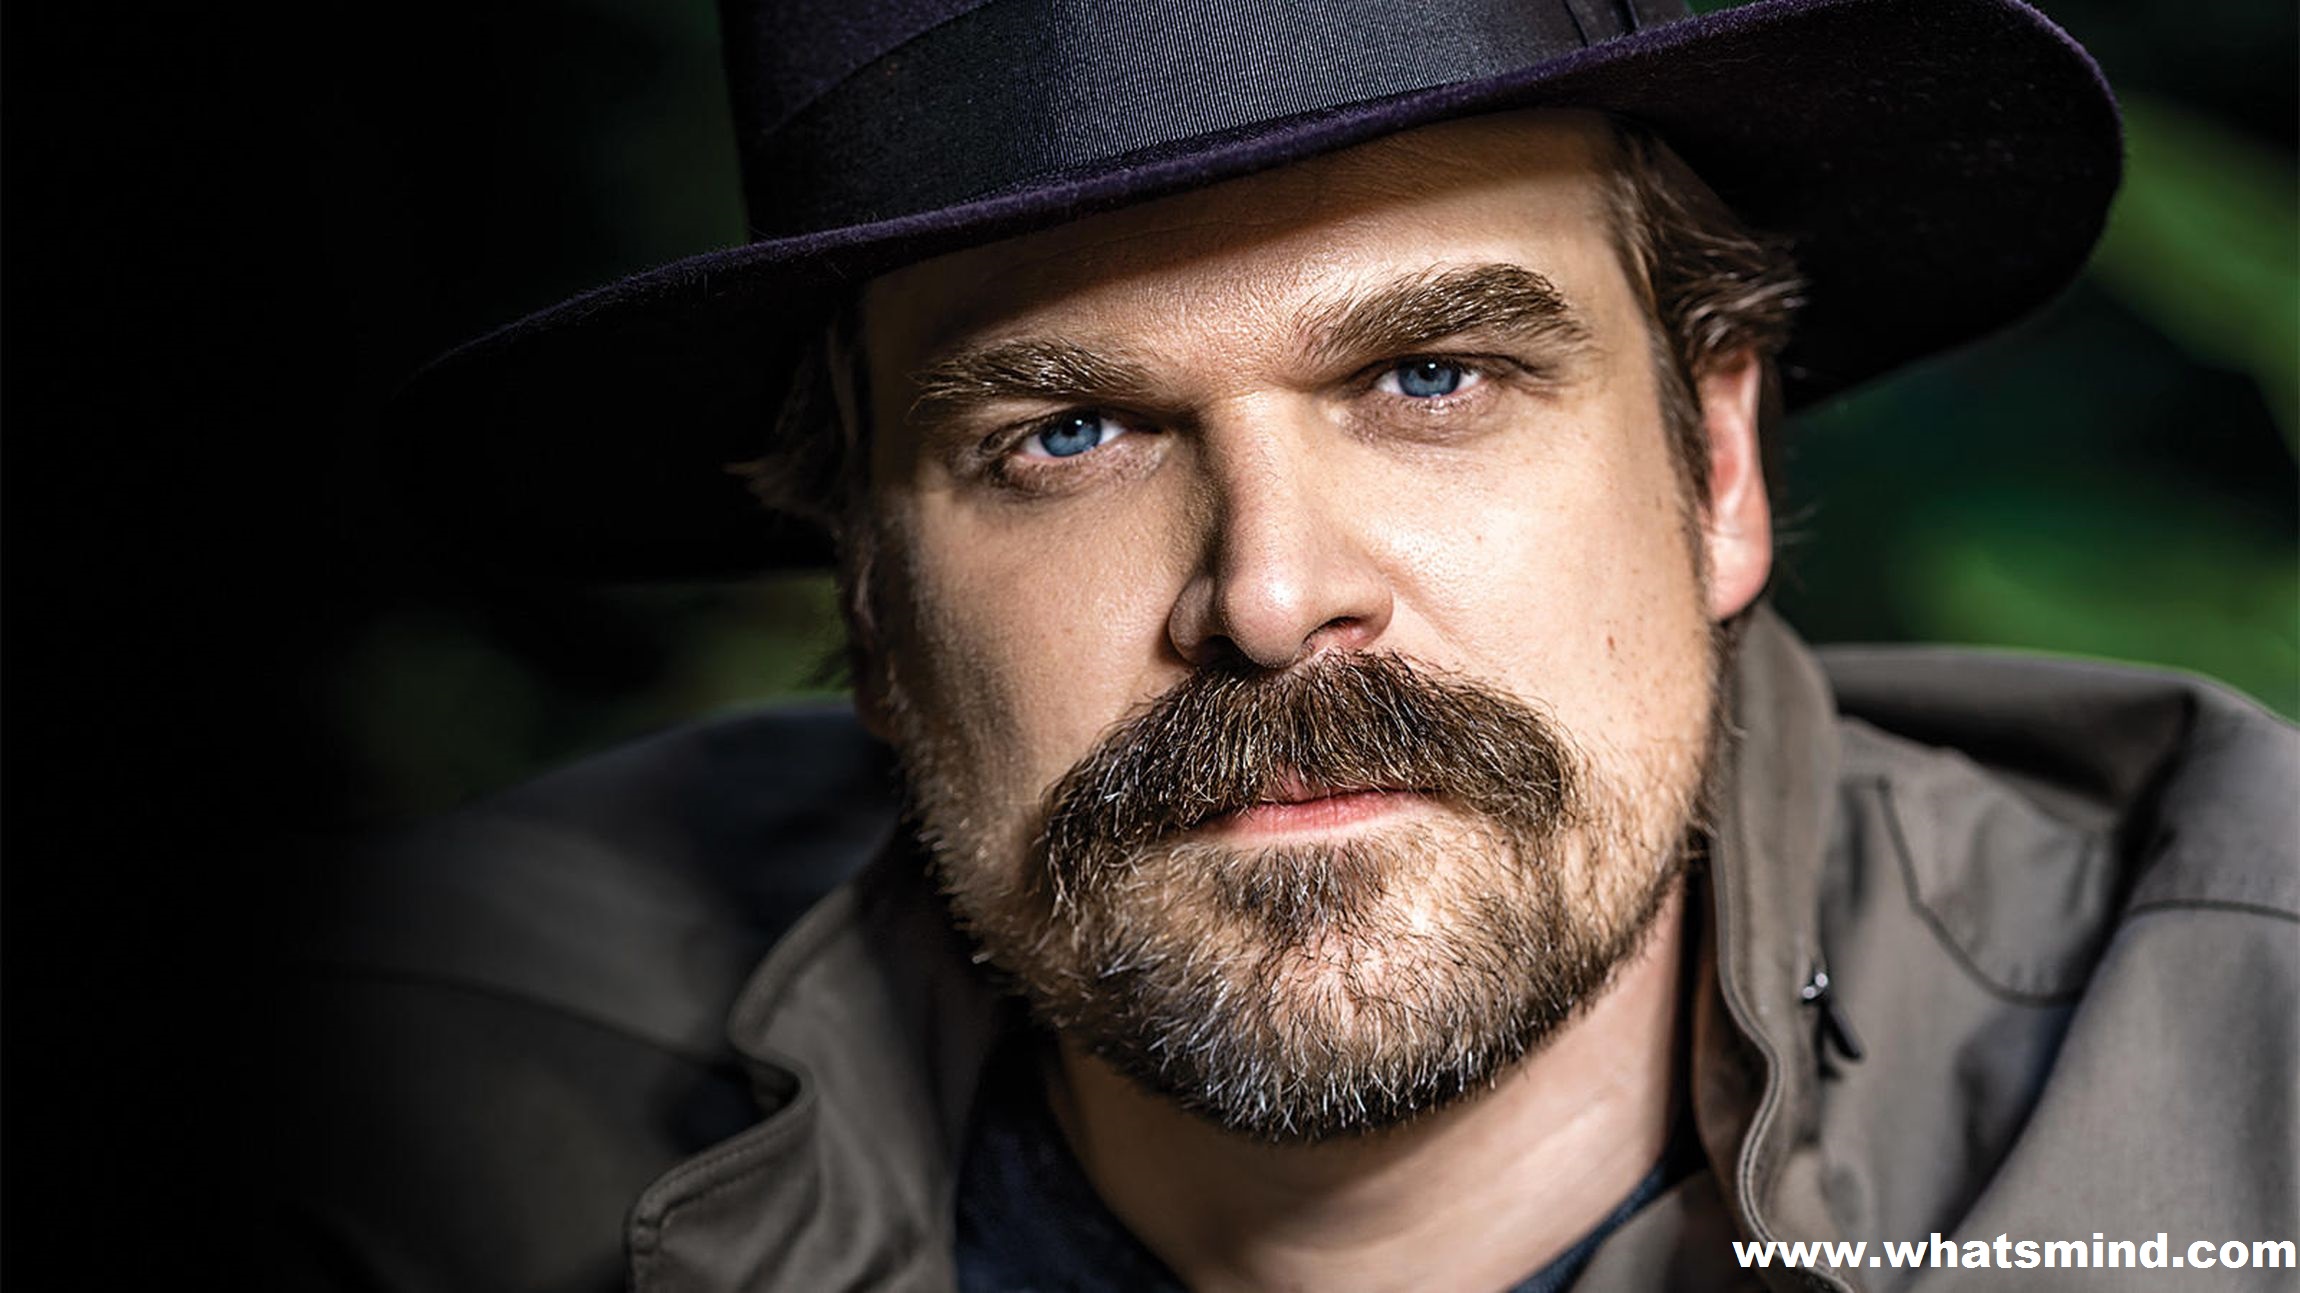 David Harbour movies and tv shows: The masterful exclusive detail.